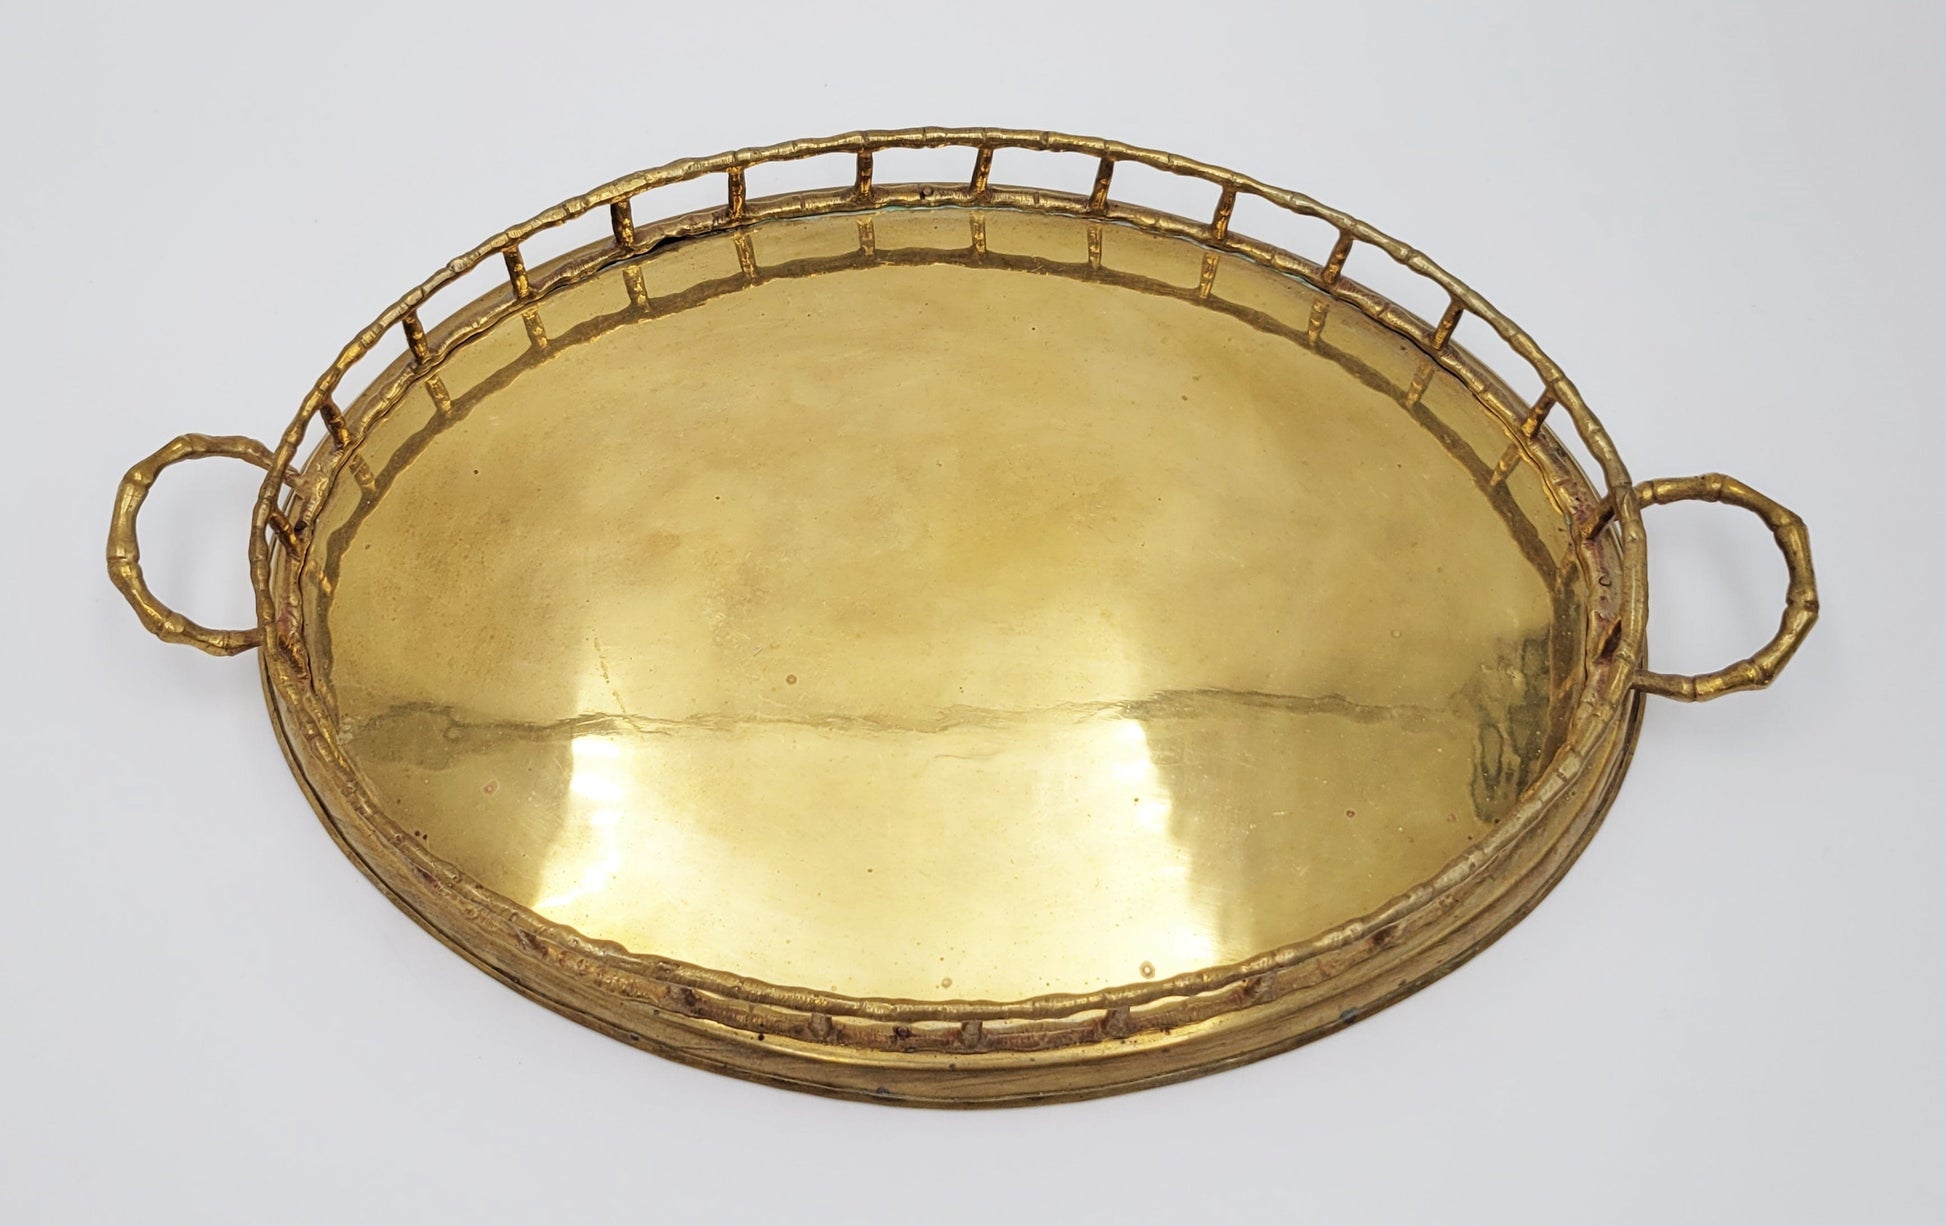 Brass Tray Serveware Vintage Solid Brass Bamboo Style Hollywood Regency Decorative Serving Tray